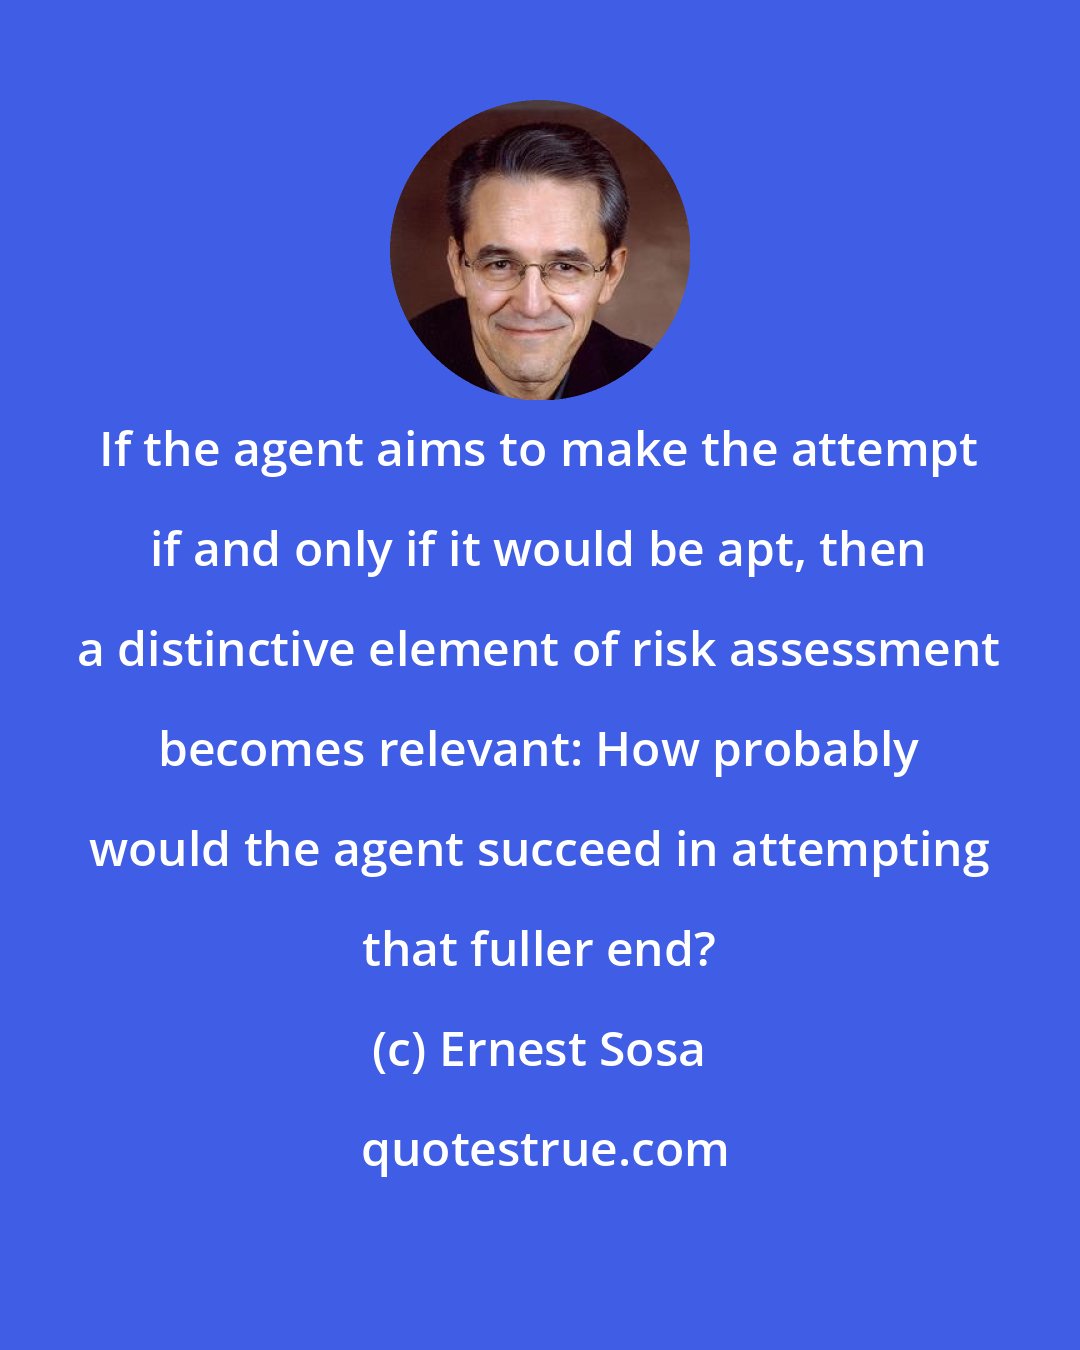 Ernest Sosa: If the agent aims to make the attempt if and only if it would be apt, then a distinctive element of risk assessment becomes relevant: How probably would the agent succeed in attempting that fuller end?